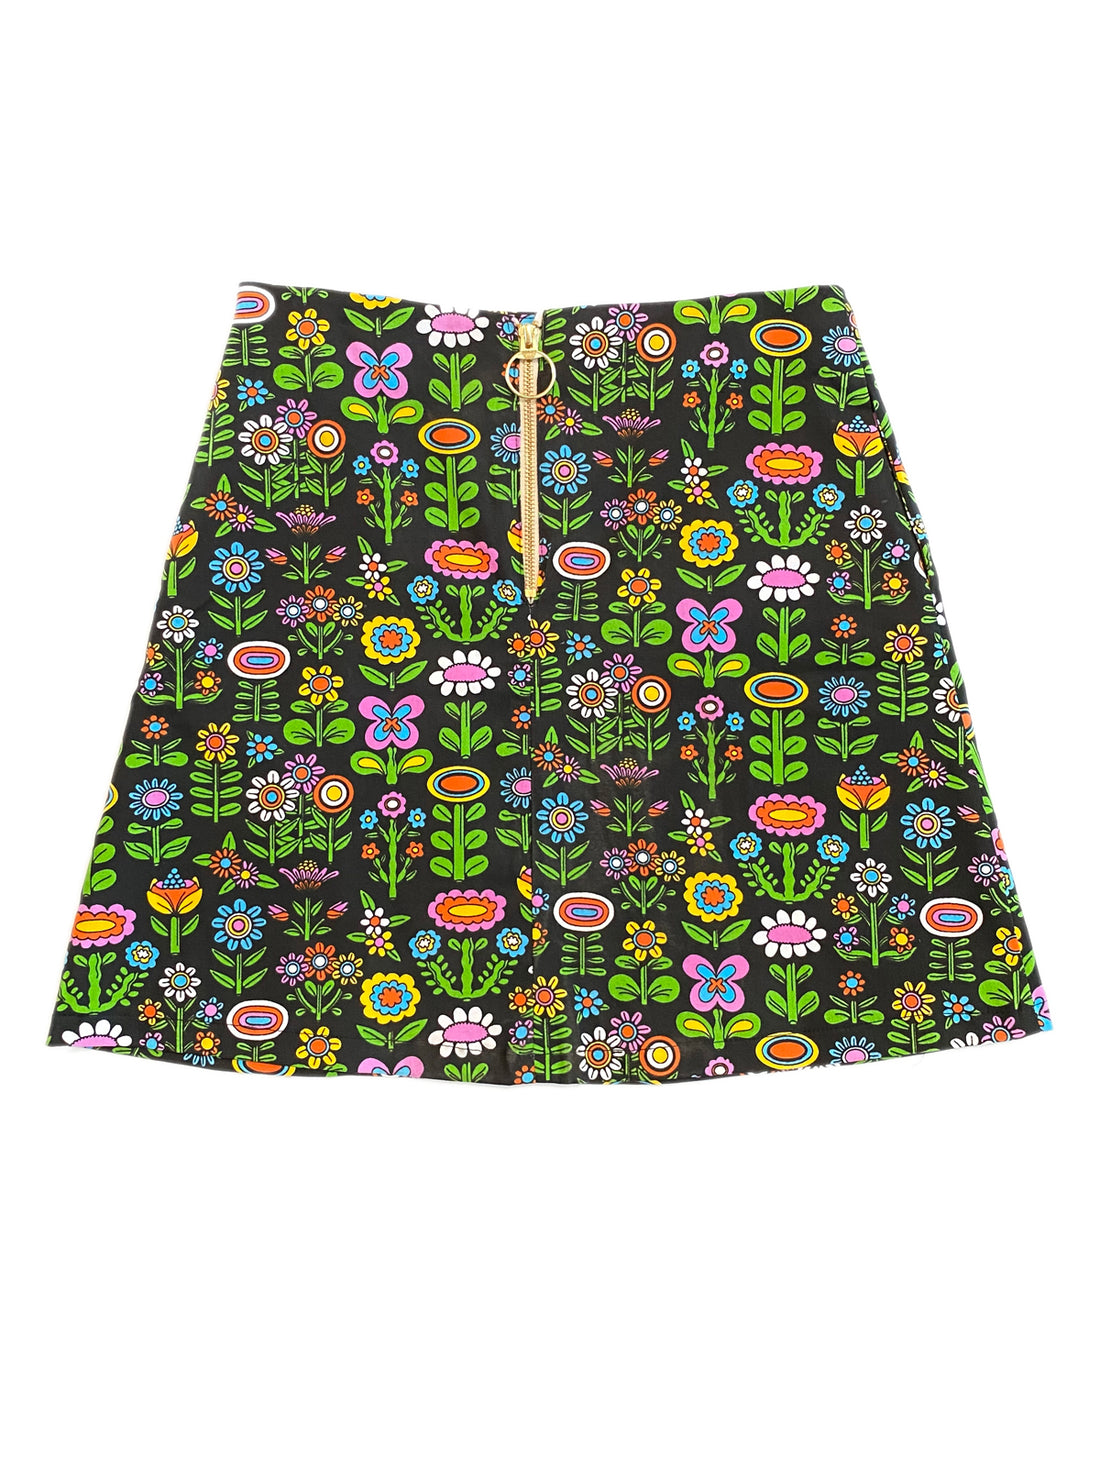 Mini Skirt Awesome Blossoms *last one